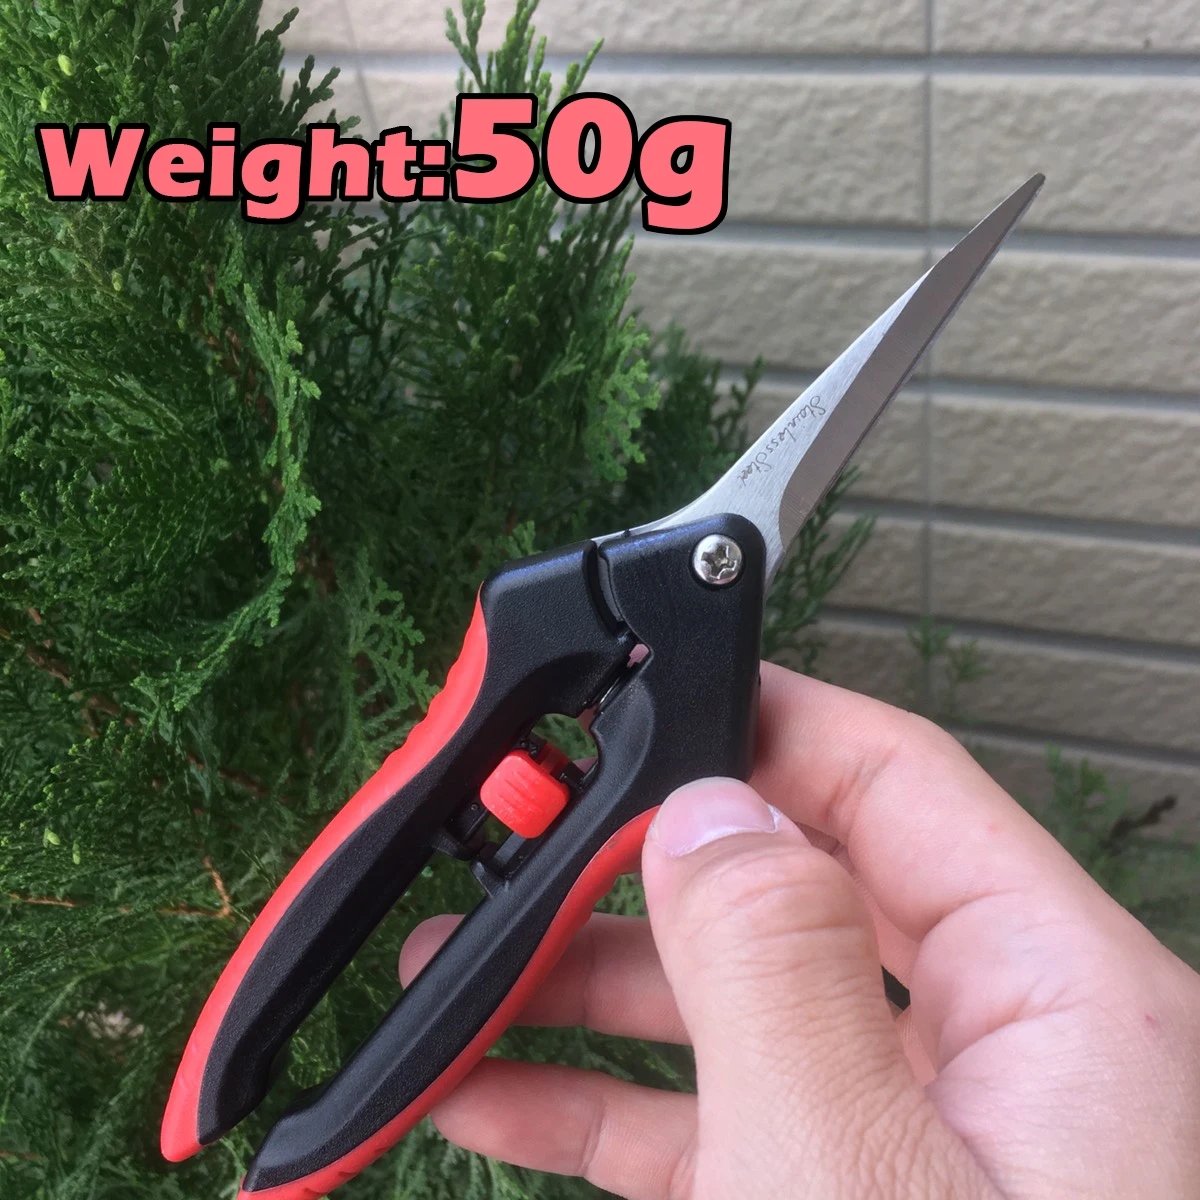 Details about   Bonsai Pruner Trimming Scissors 5pcs For Leaf Bud Fishing Tool Trimmers 4" 